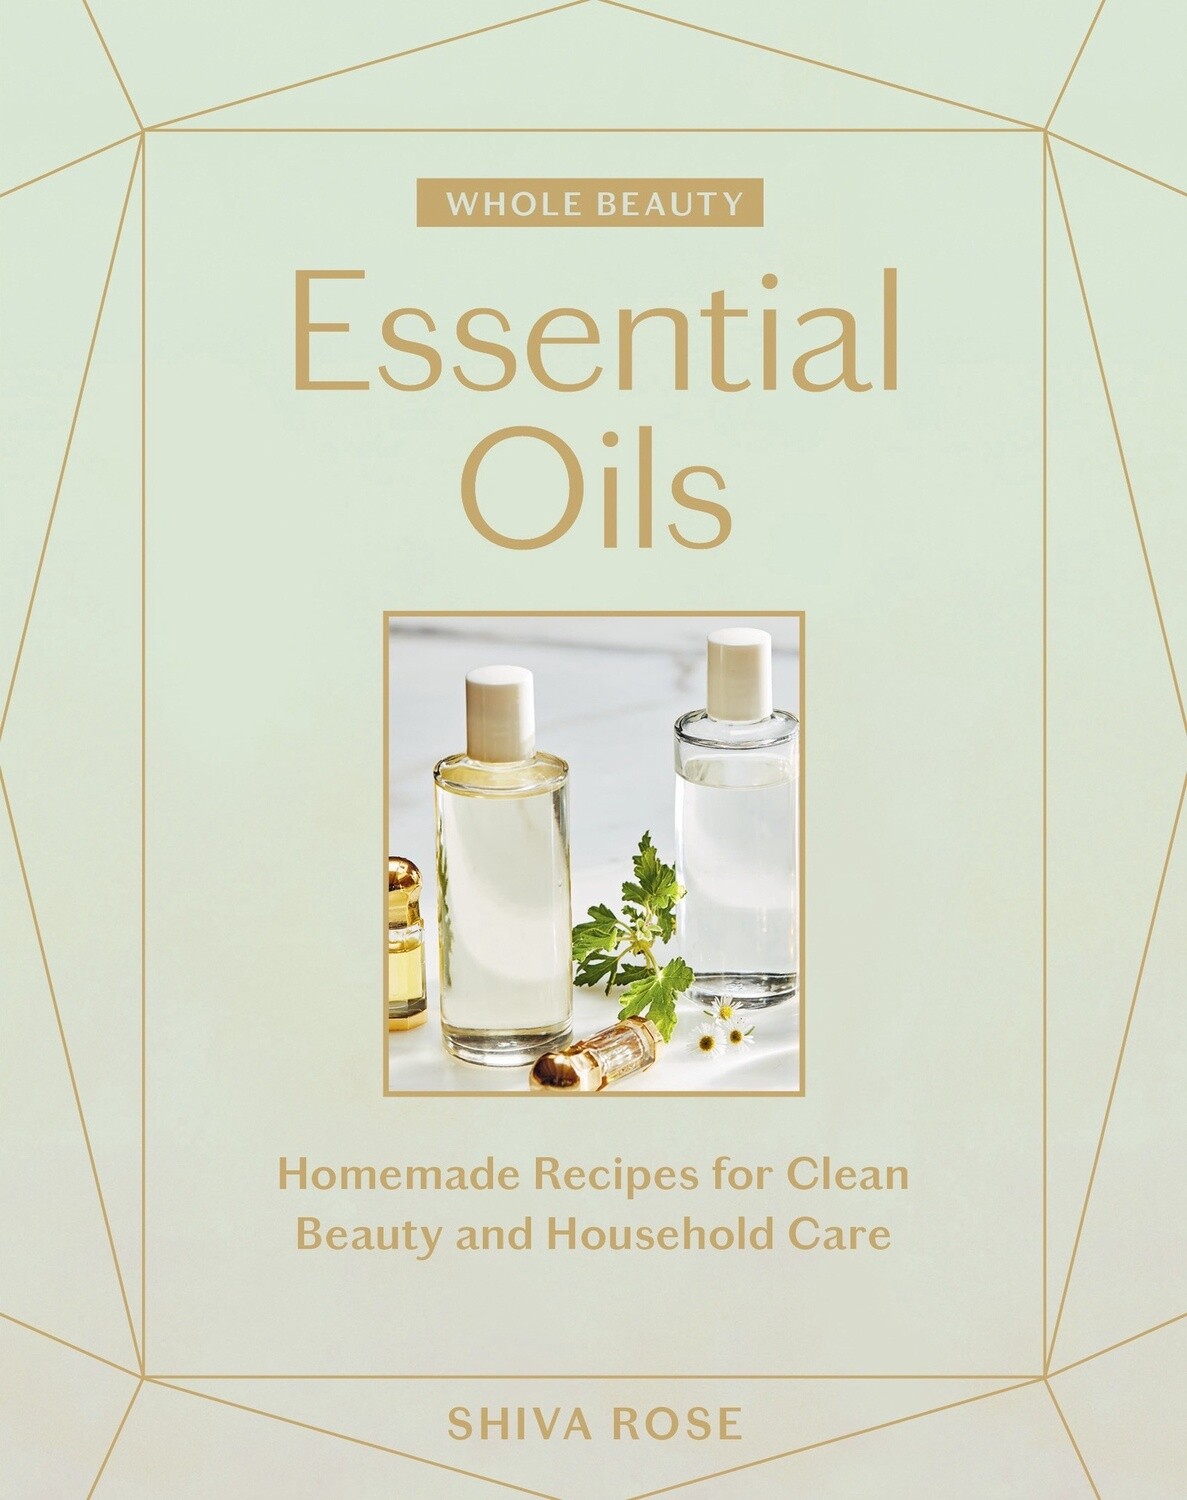 Whole Beauty: Essential Oils by Shiva Rose